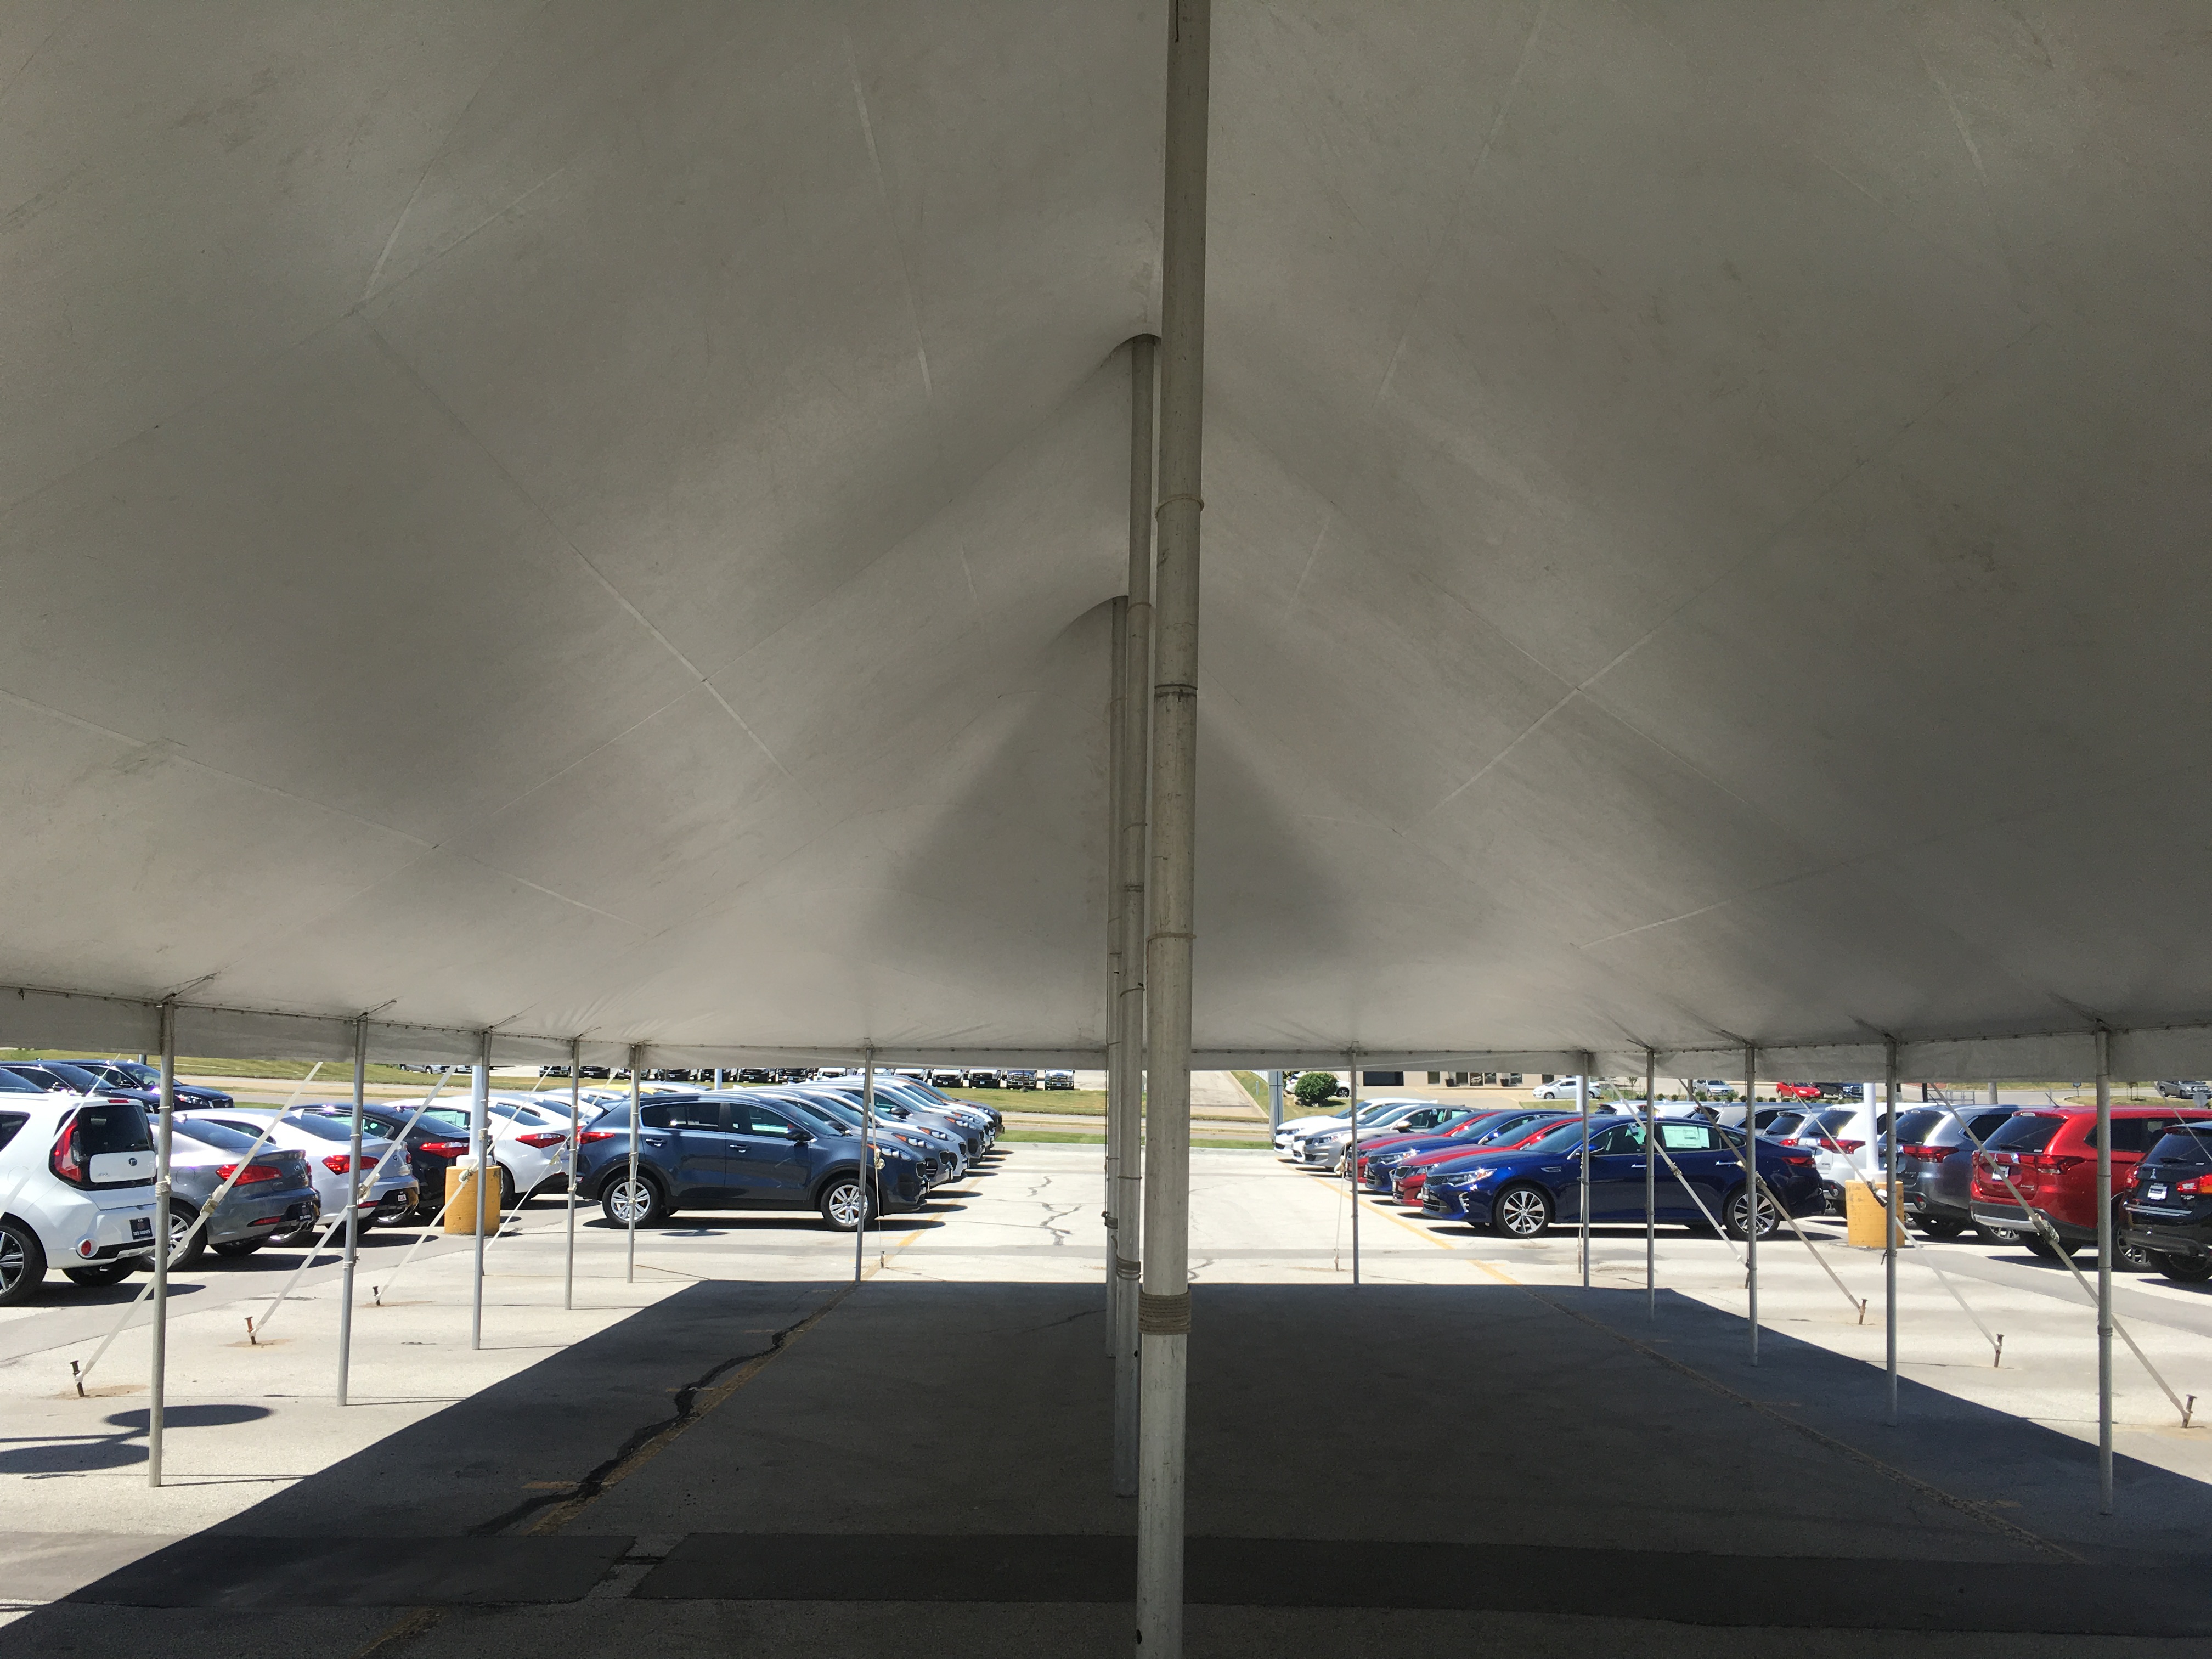 Under the rope and pole tent setup for Kia Motor dealership tent sale